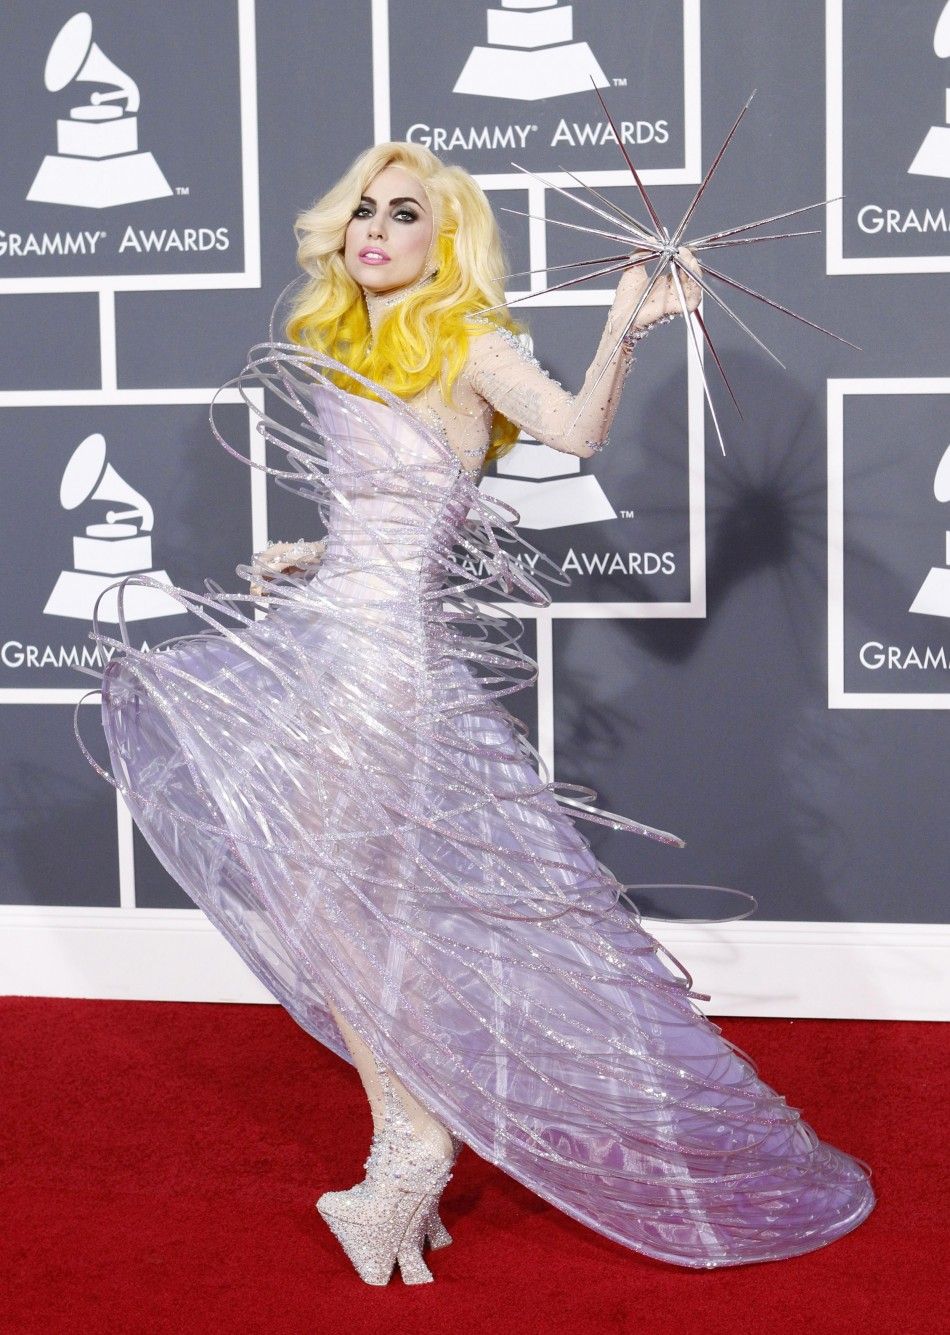 Lady Gaga poses on the red carpet at the 52nd annual Grammy Awards in Los Angeles